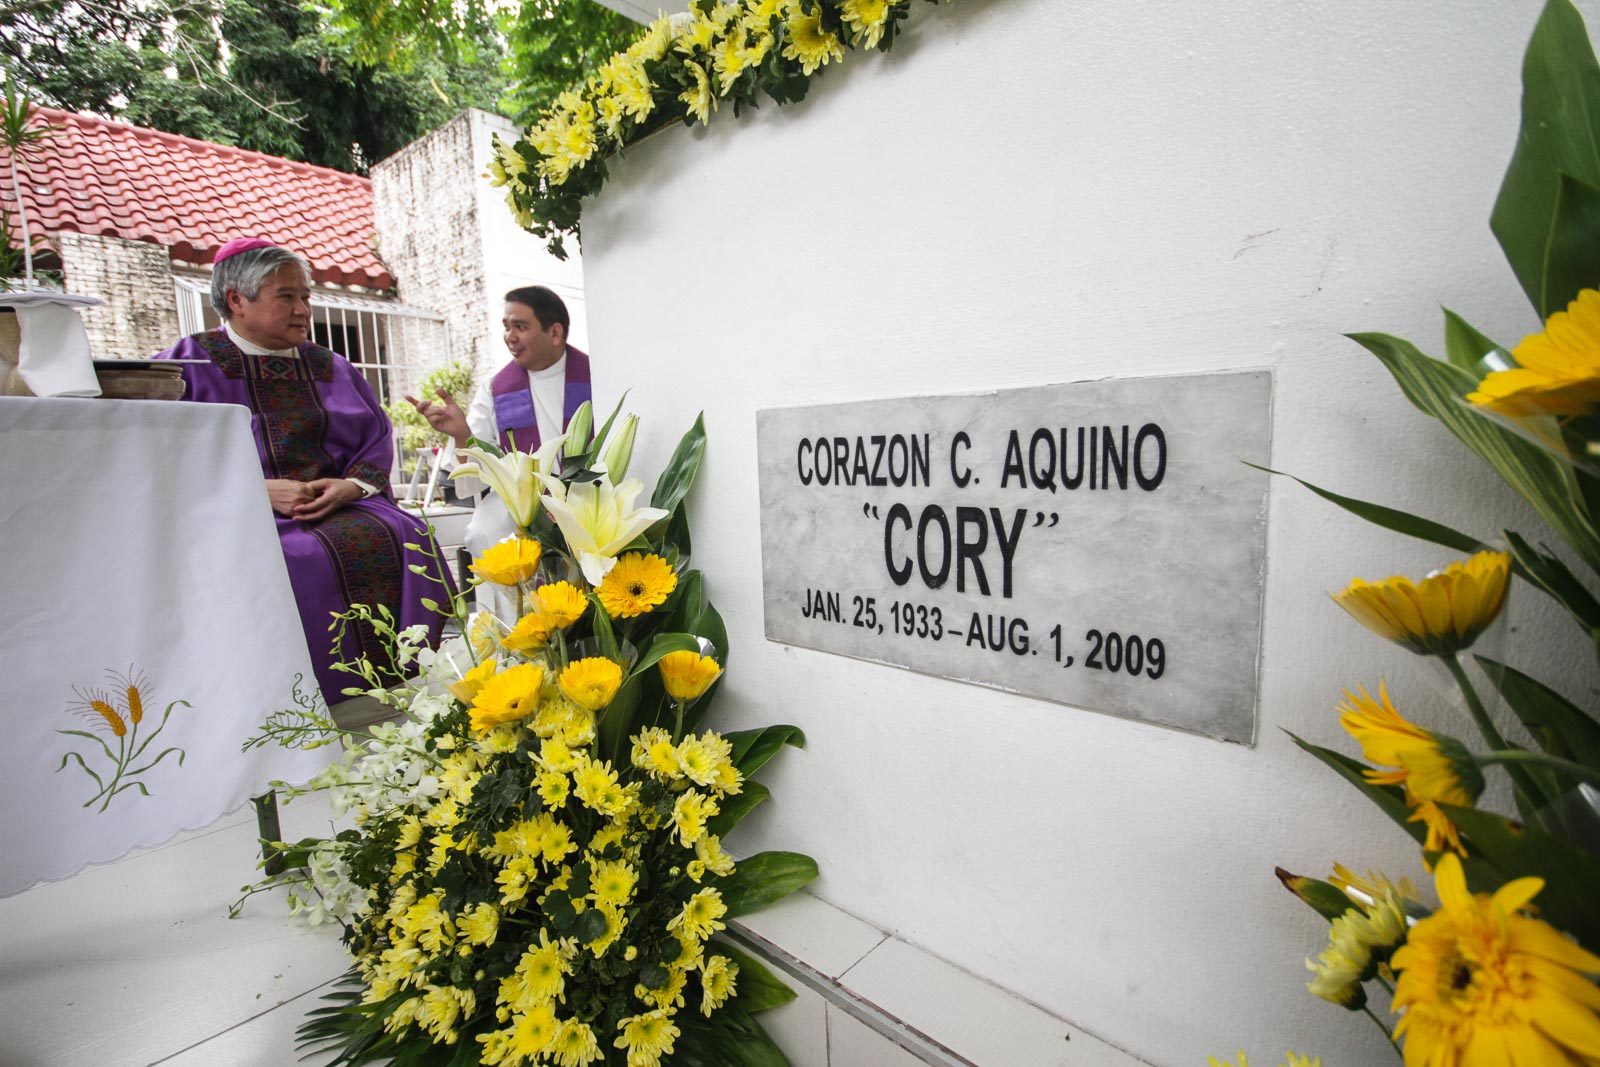 ‘Resist historical revisionism,’ Pangilinan says on Cory’s 10th death anniversary